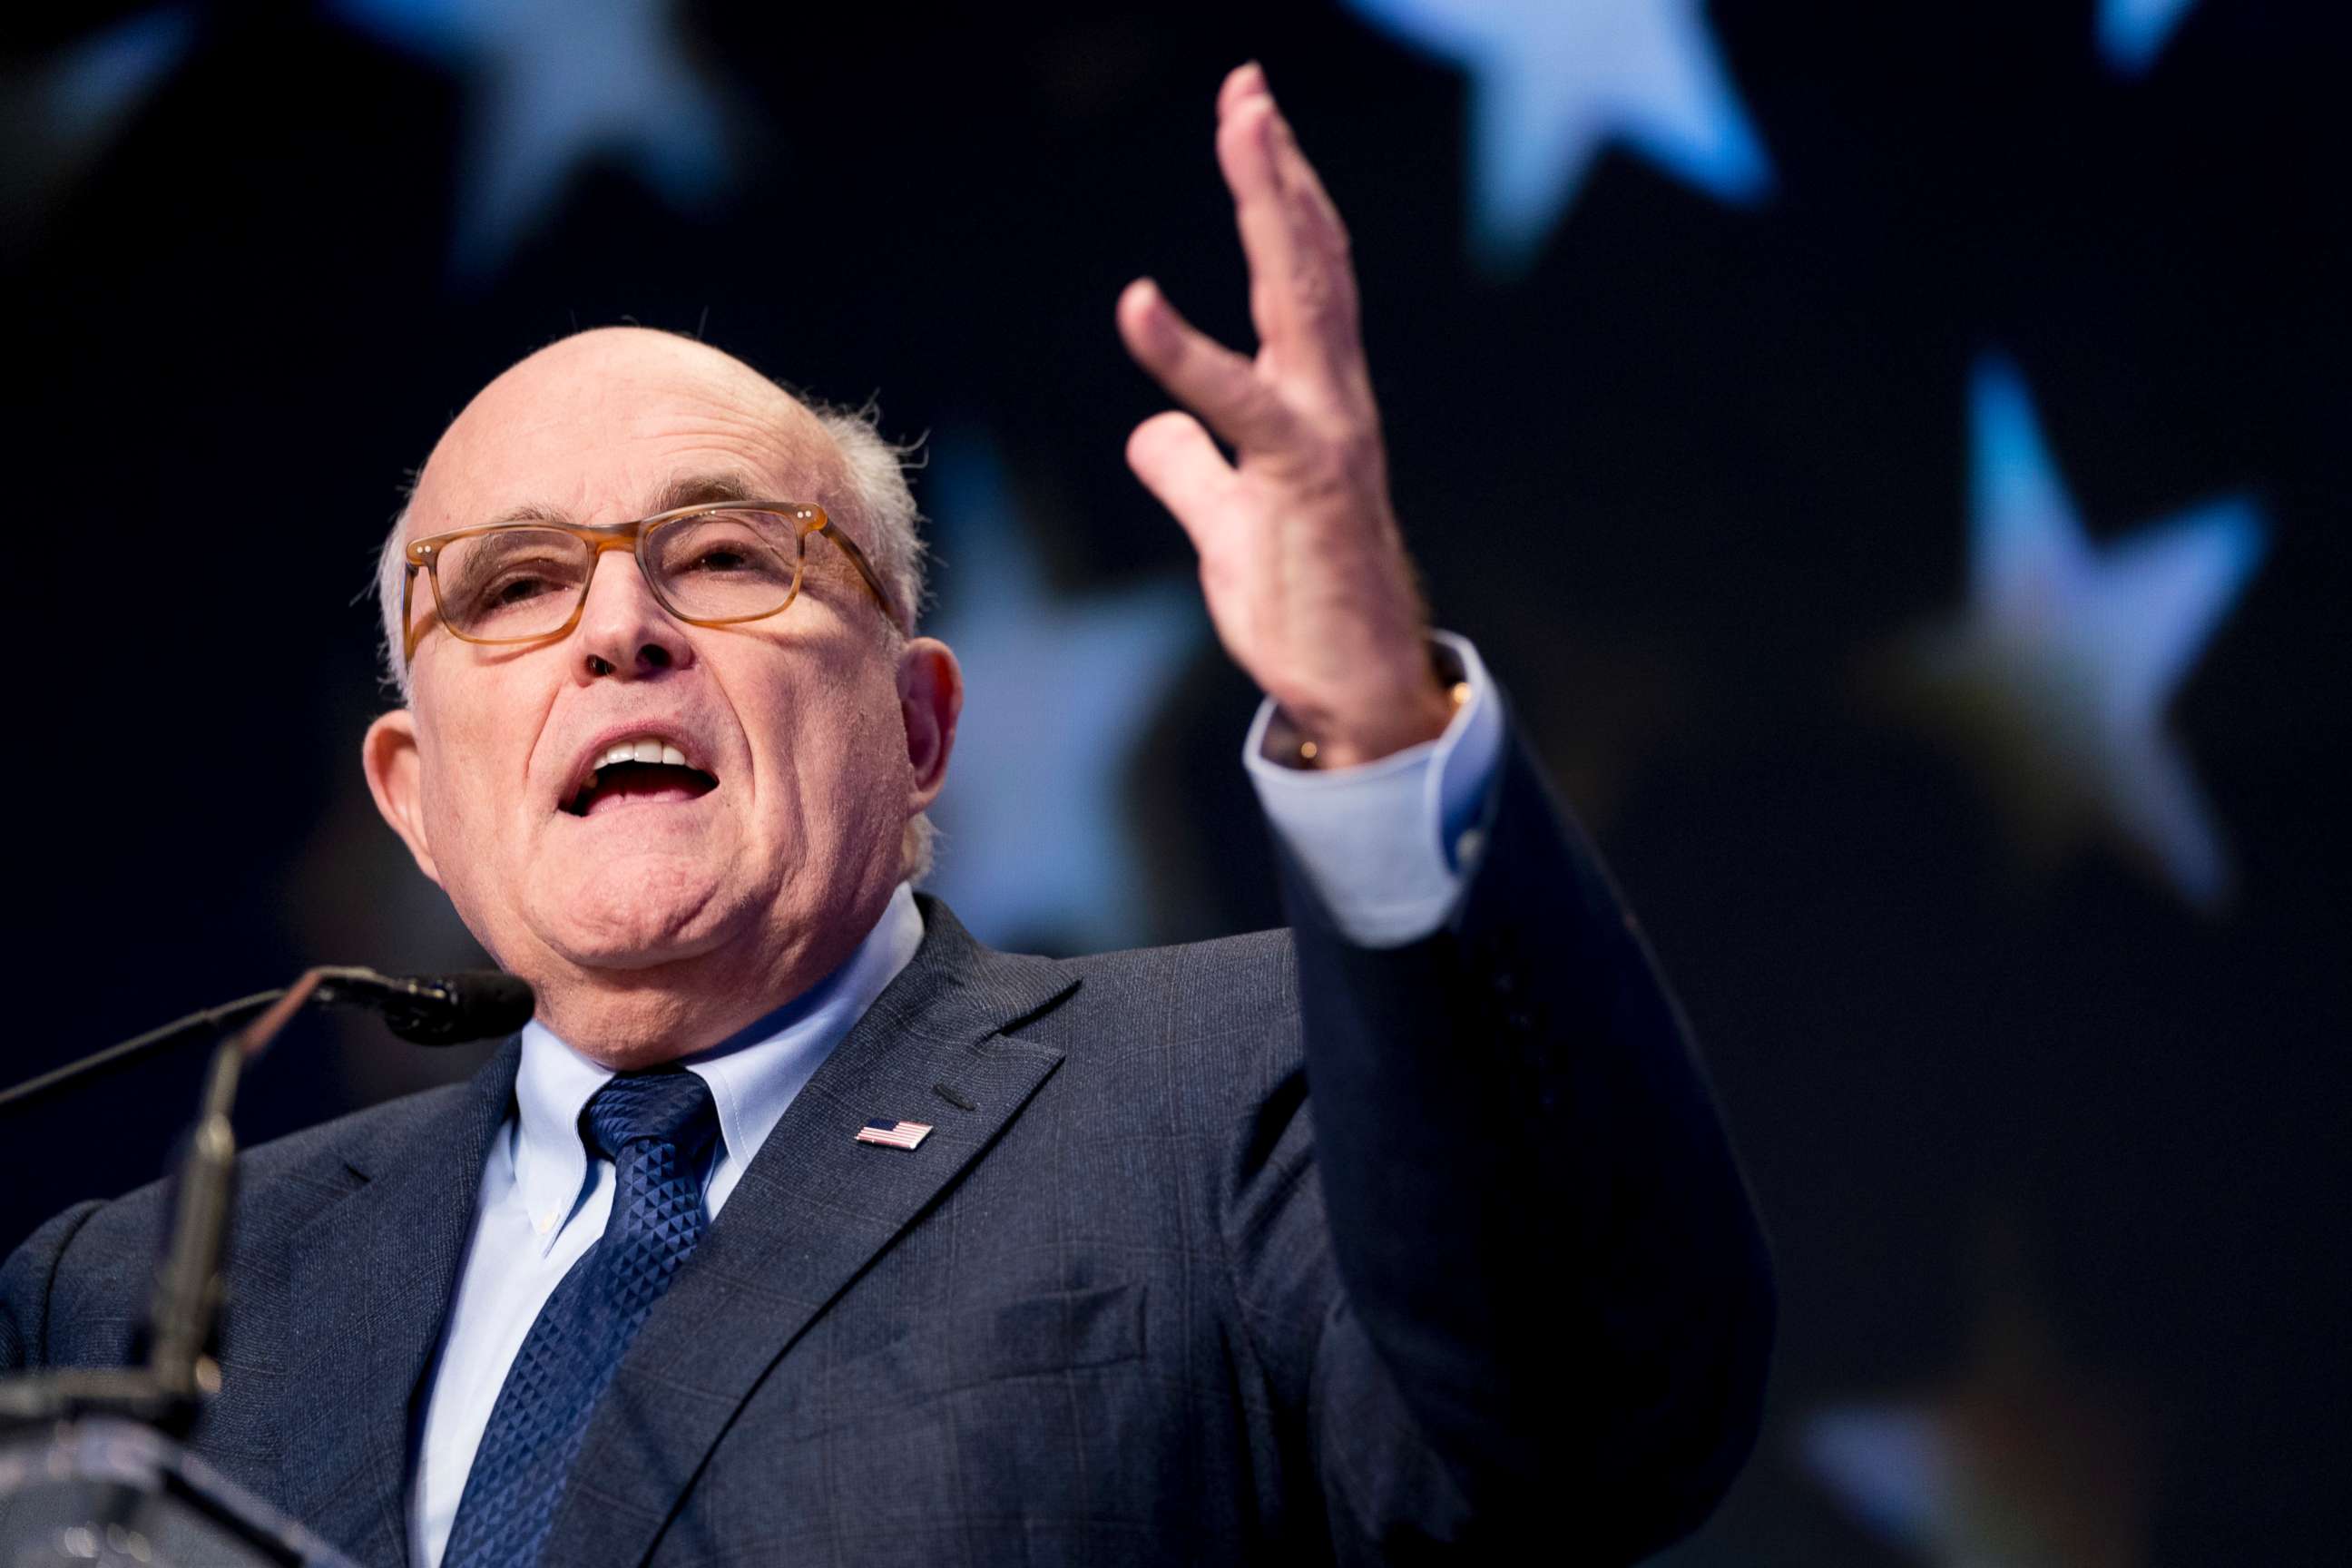 PHOTO: Rudy Giuliani, an attorney for President Donald Trump, speaks at the Iran Freedom Convention for Human Rights and democracy at the Grand Hyatt, May 5, 2018, in Washington.